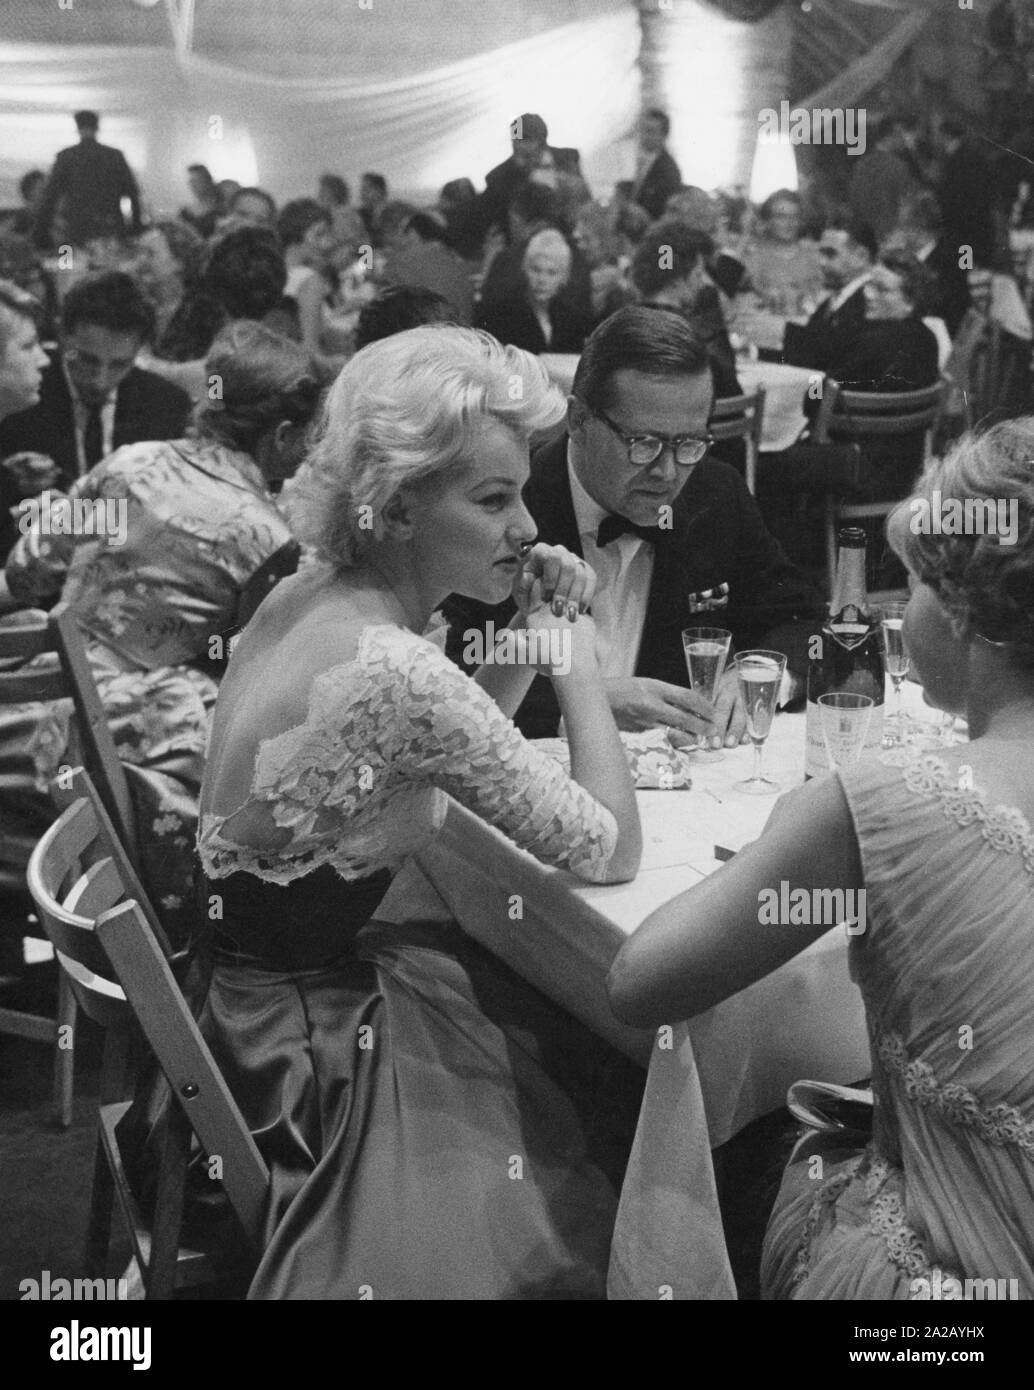 The radio host Karl Eduard Schnitzler and his wife, the actress Christine Laszar, sit at the table during the Defa-Filmball der Jugend (Defa Film Ball of Young People) in the company of women with a bottle of champagne. In the background, guests of the film ball. (undated picture) Stock Photo